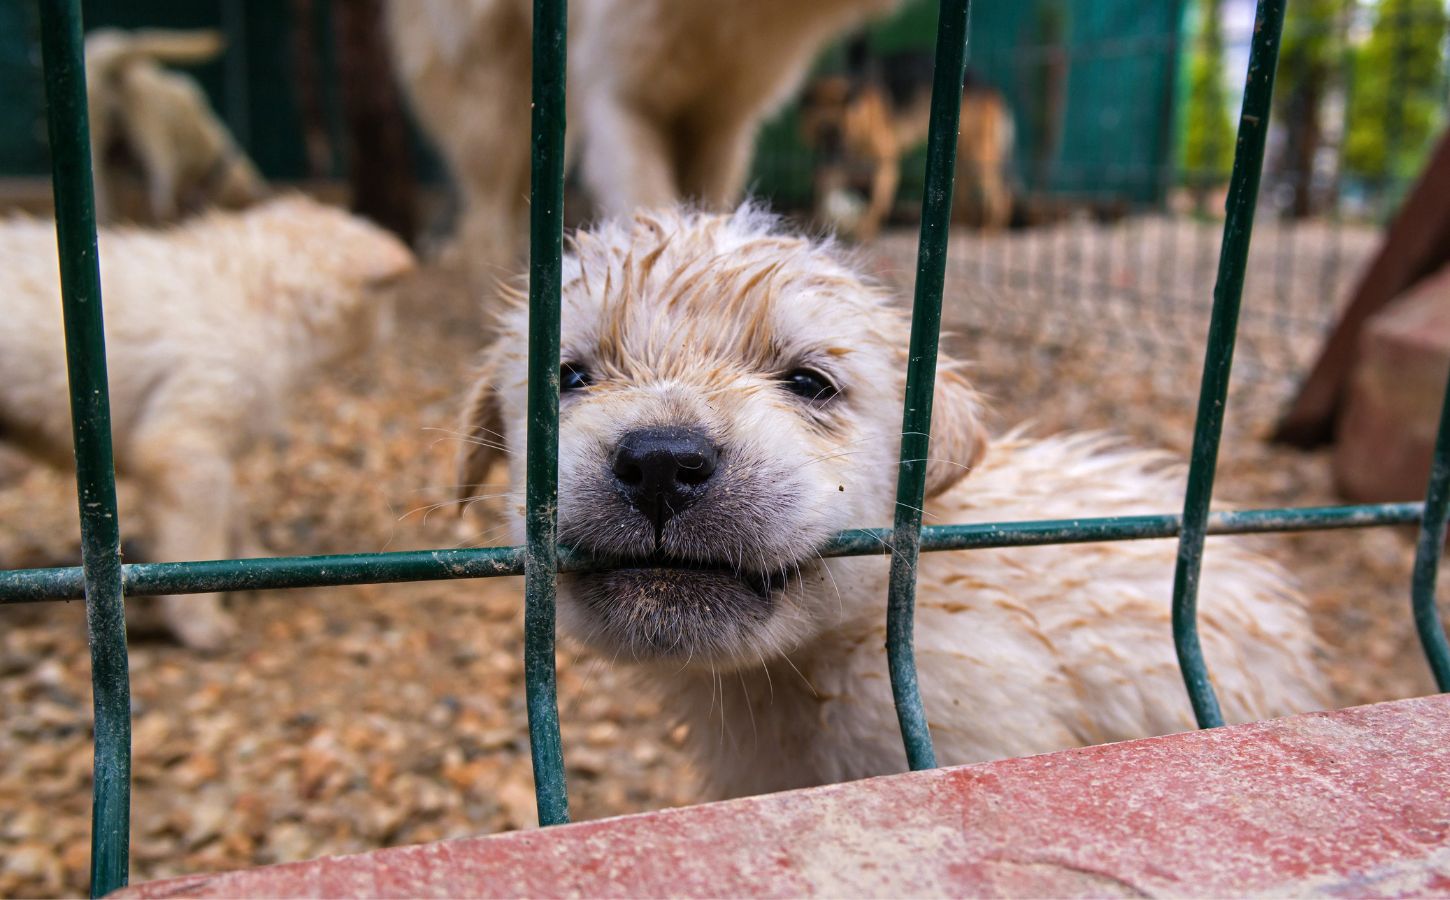 A puppy biting a cage at a dog mill farm